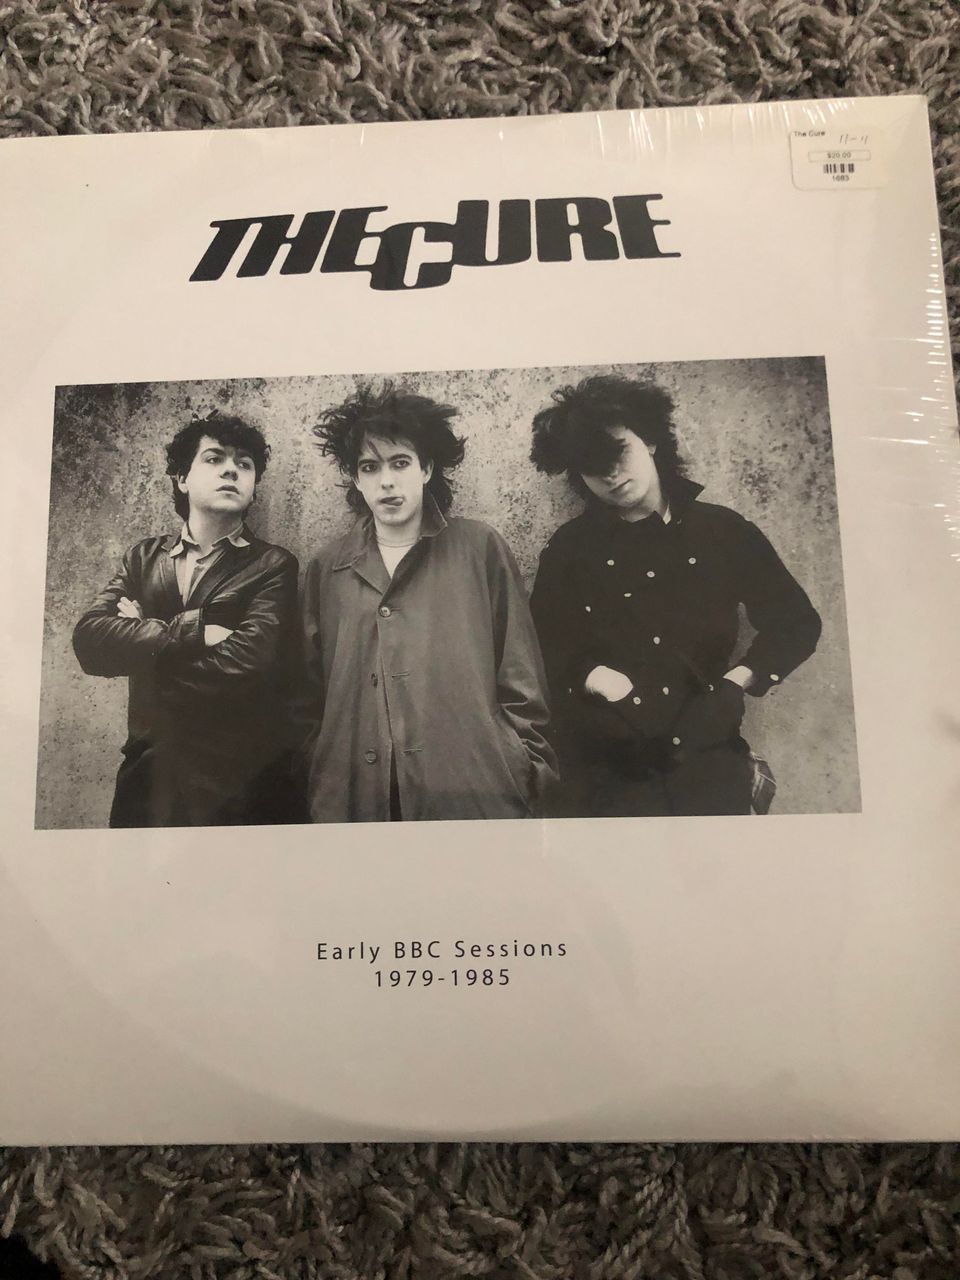 The Cure - Early BBC Sessions 1979-1985 LP (UUSI MUOVEISSA!!)